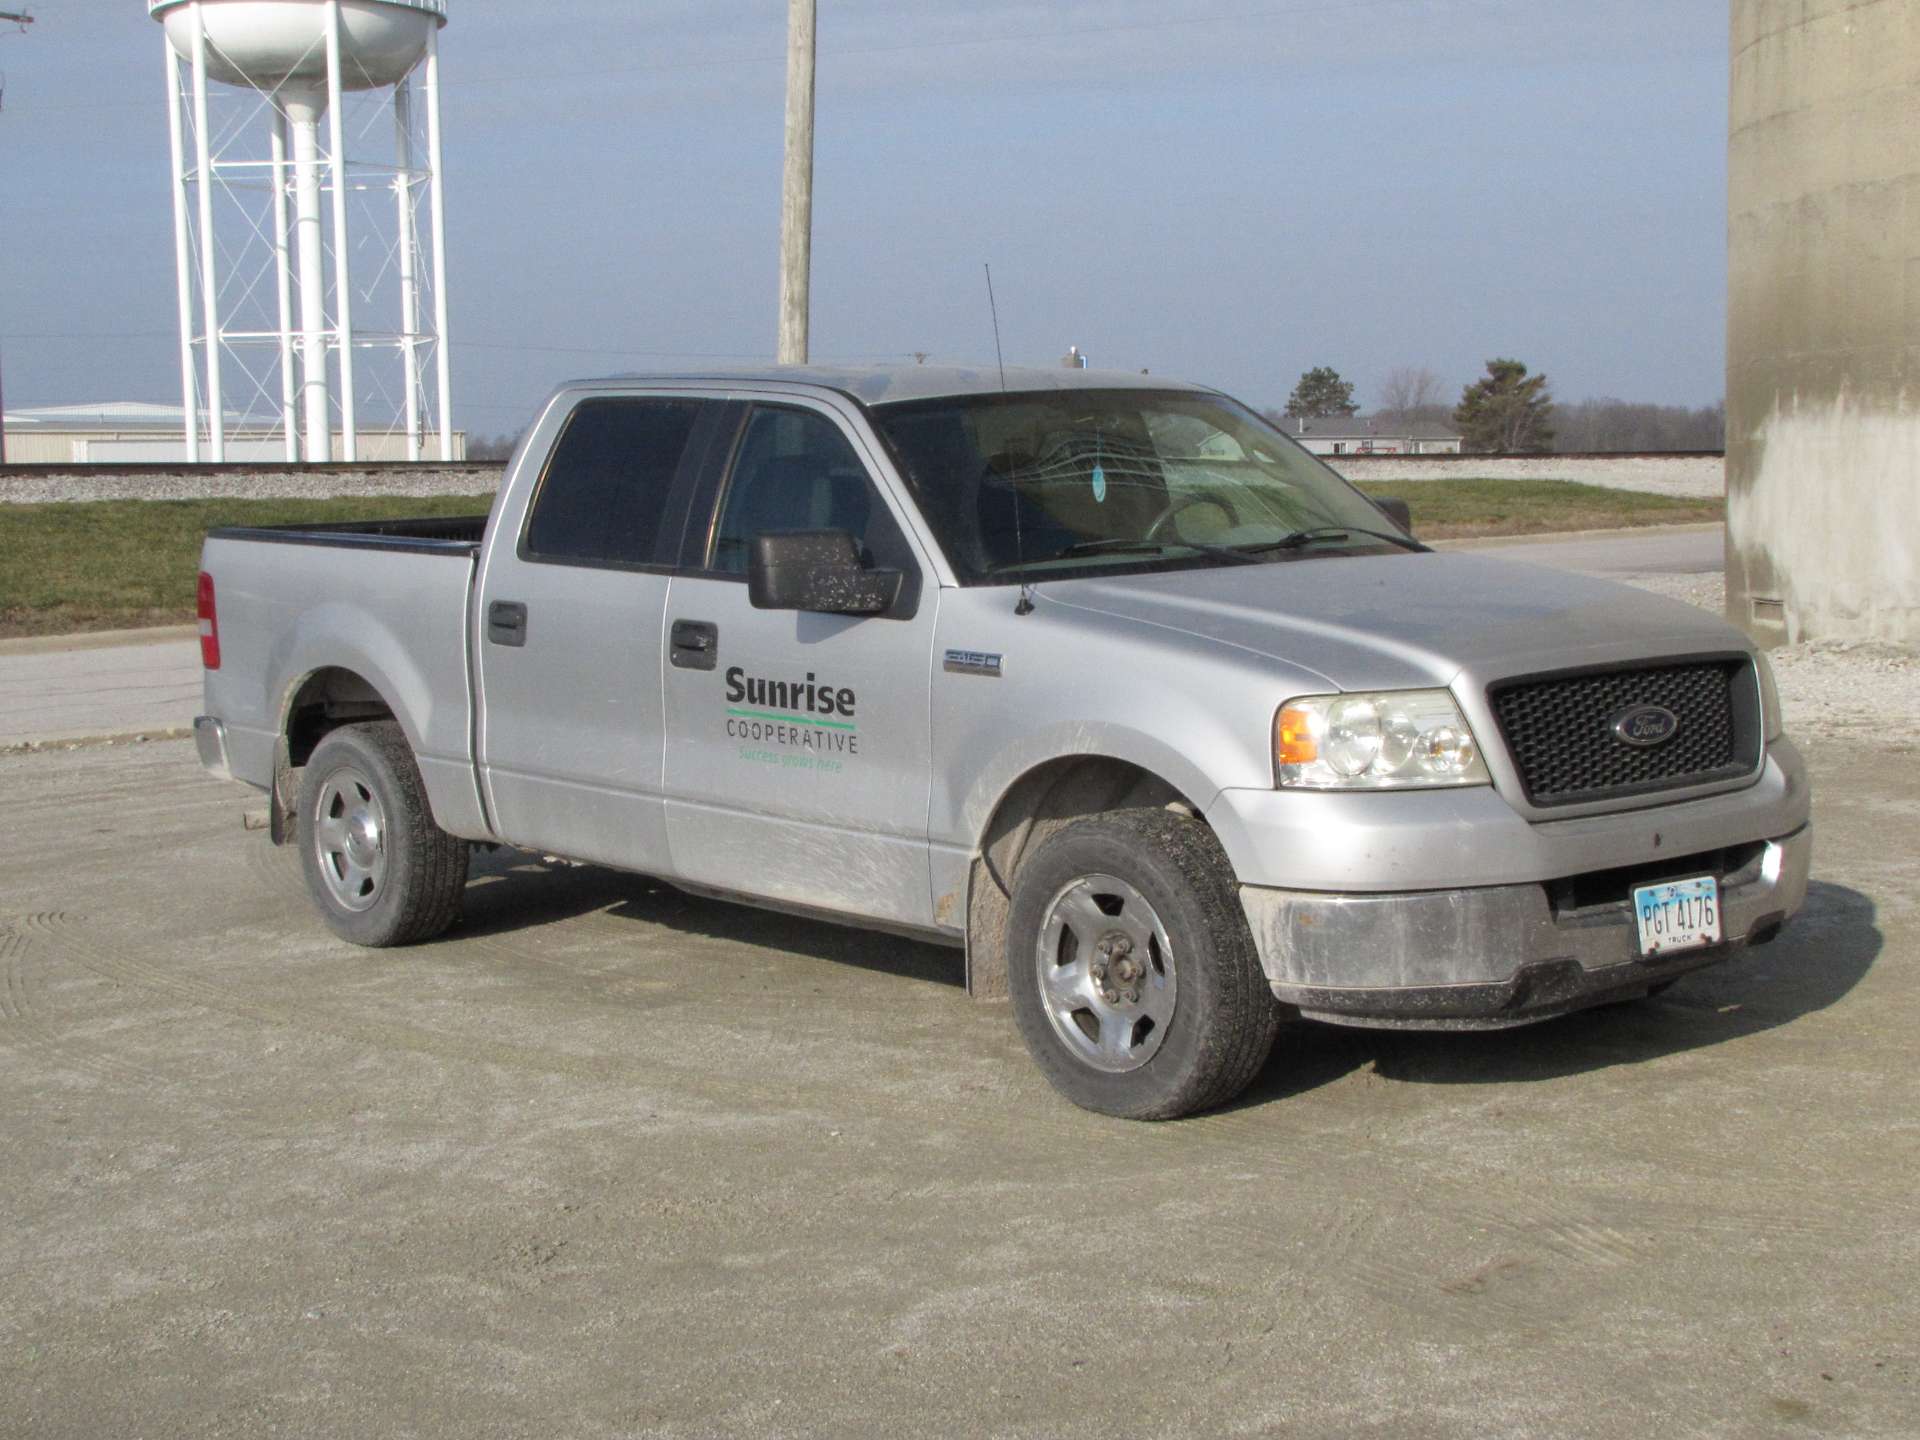 2005 Ford F-150 XLT pickup truck - Image 16 of 89